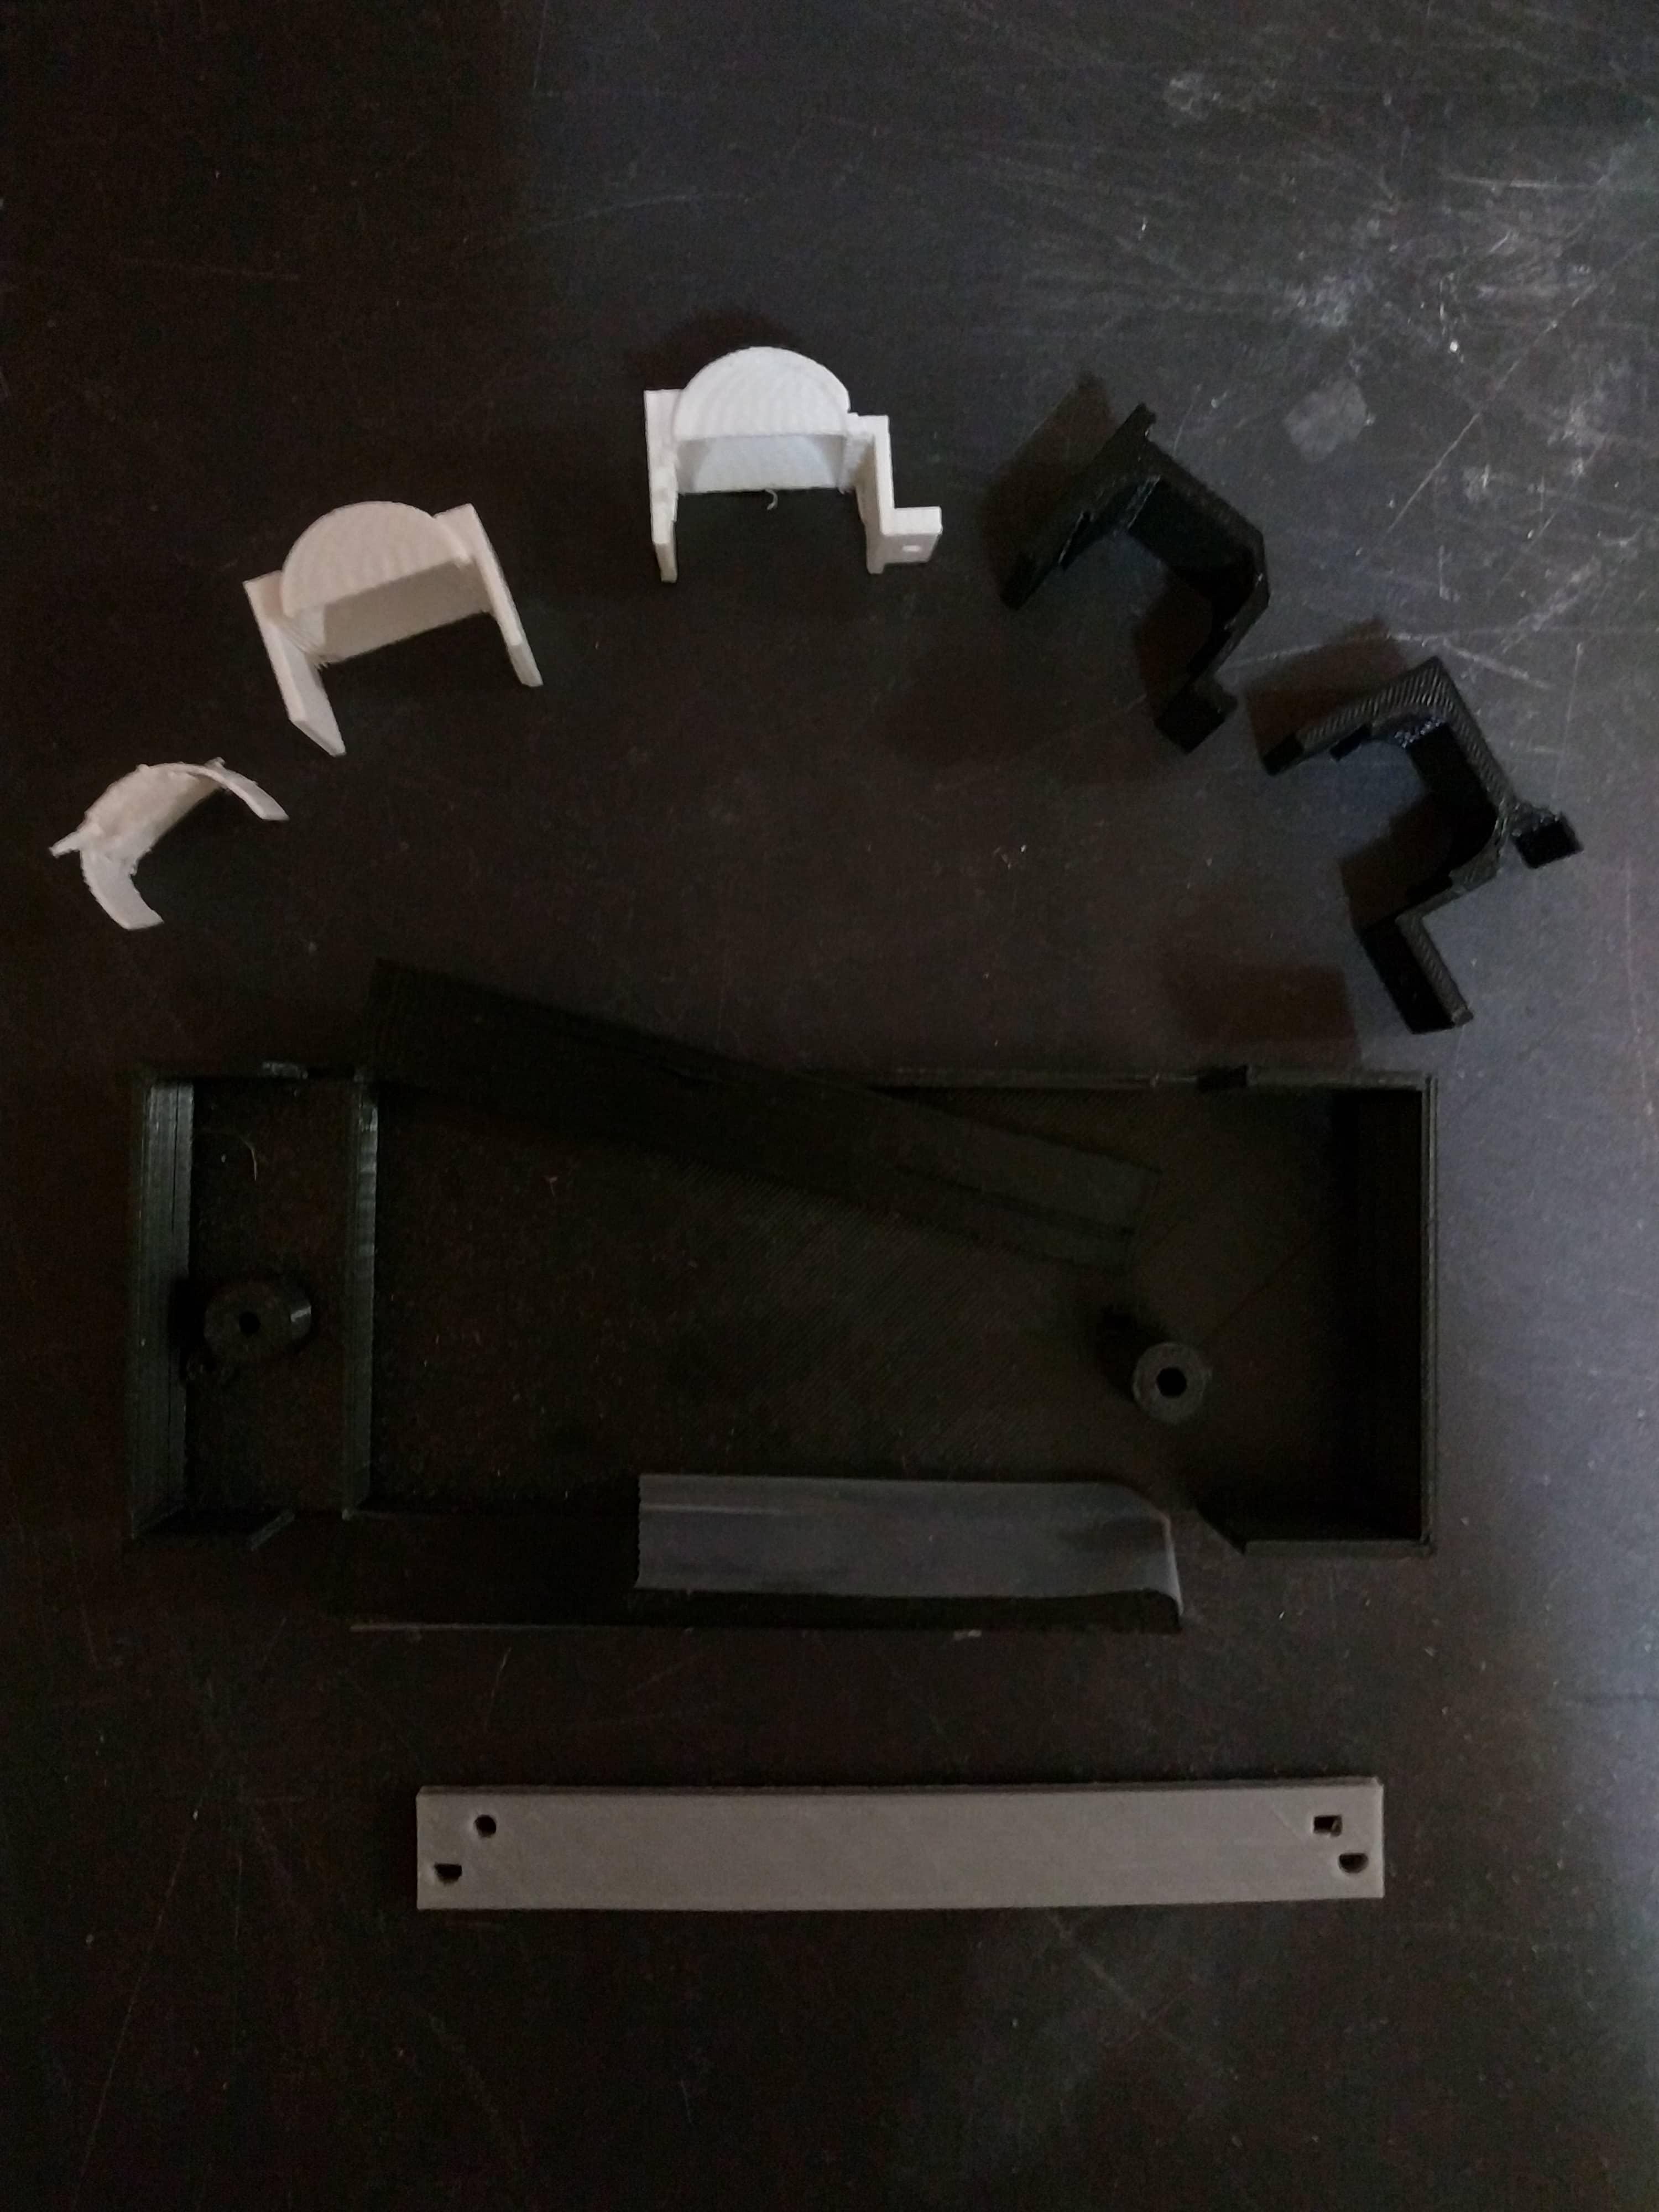 Five iterations of the motor clip design sit on a table above one of the original buggy bases and the plastic rectangle with screw holes in it